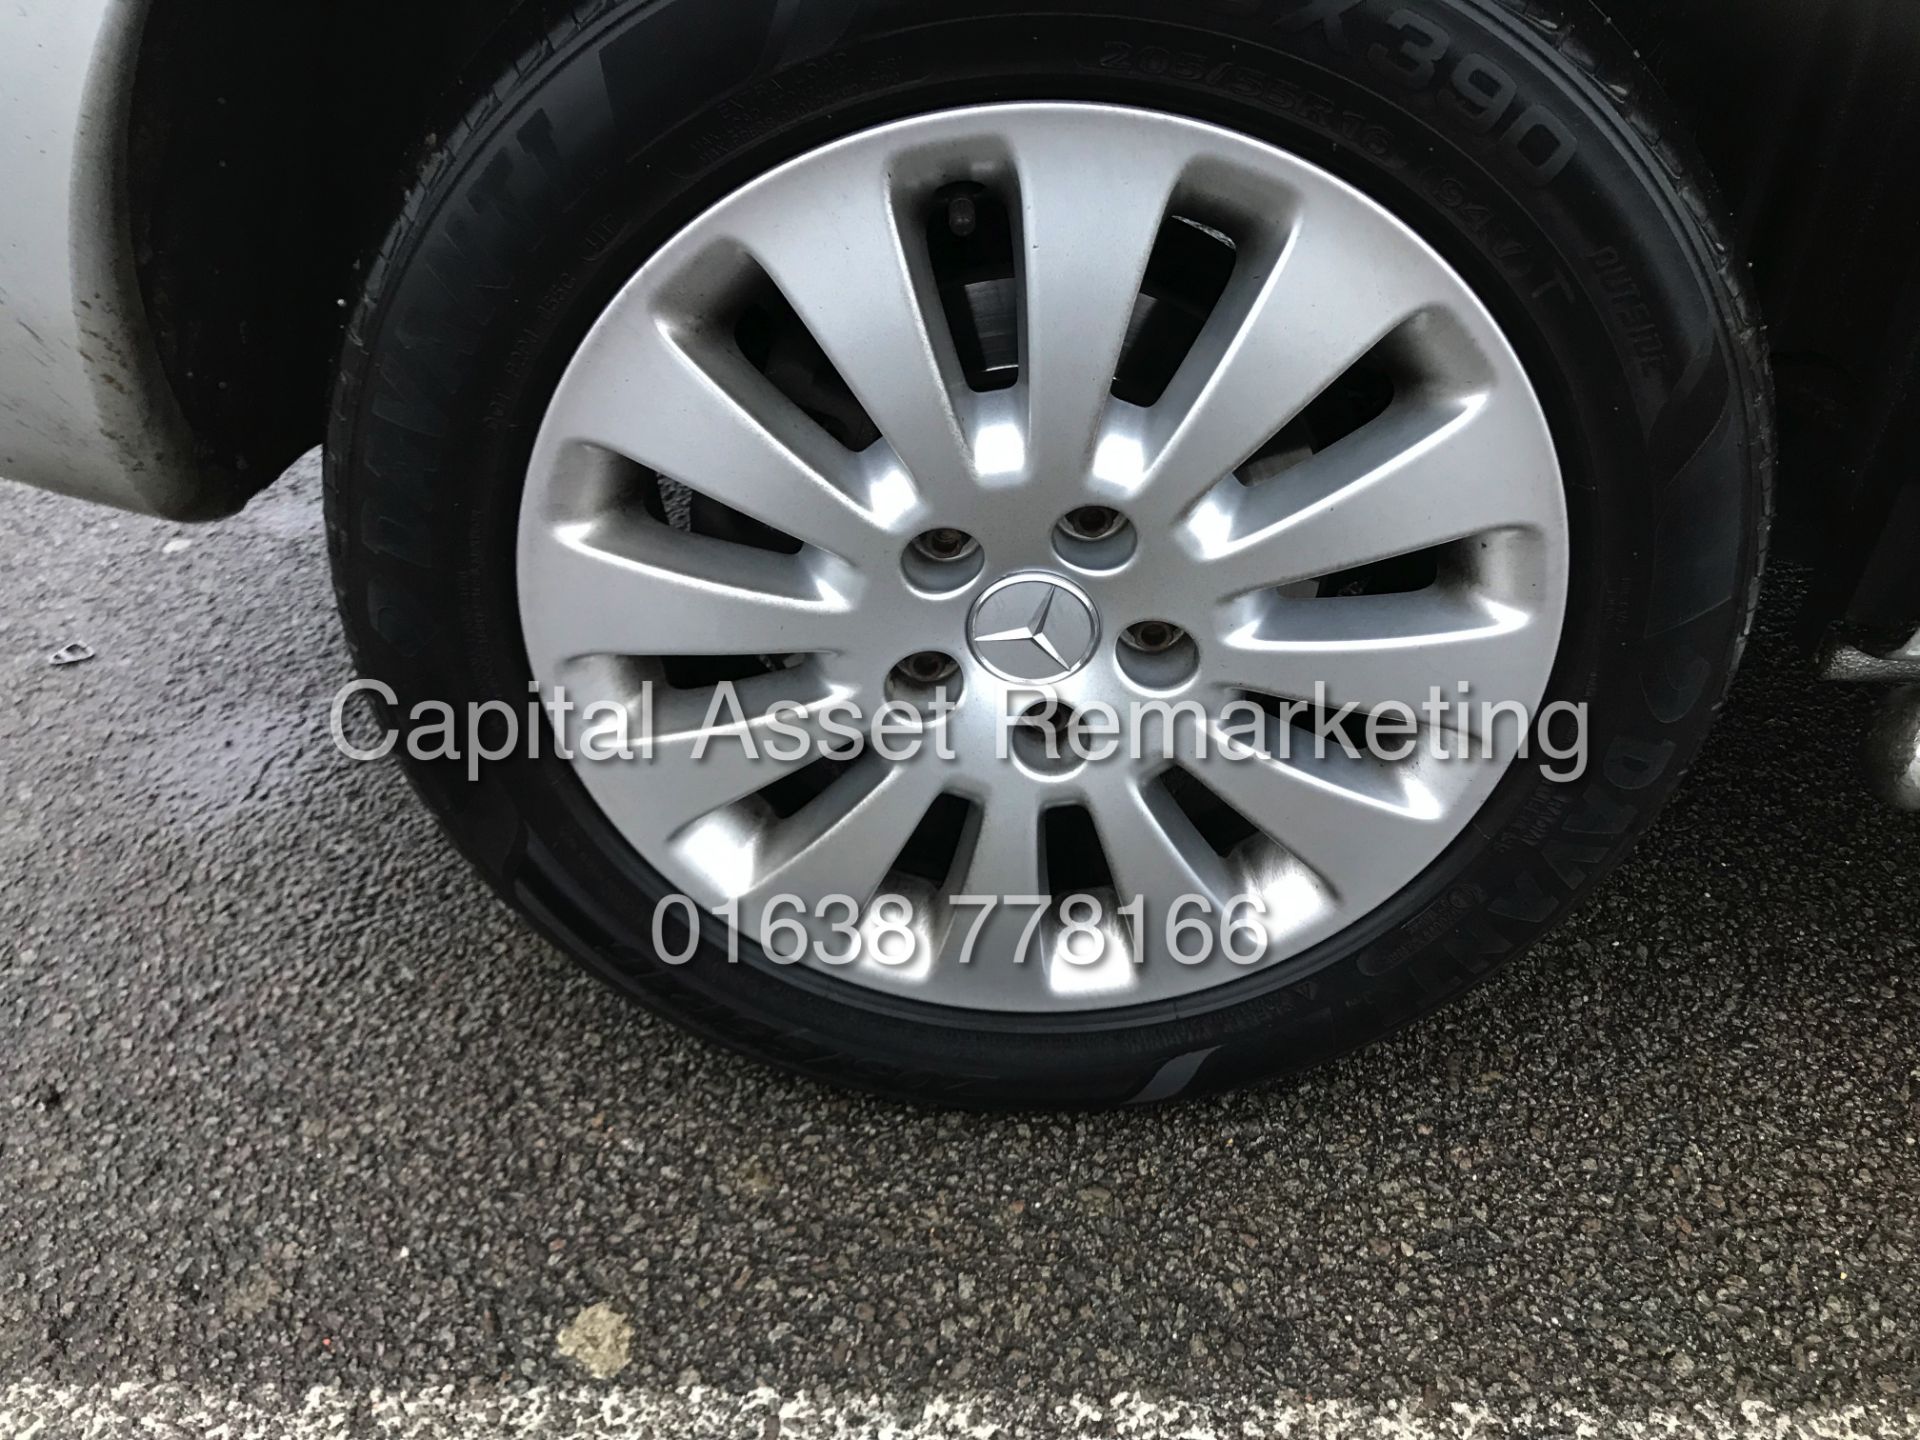 MERCEDES CITAN 111CDI "SPORT" LWB (16 REG) 1 OWNER-AIR CON-6 SPEED-FULLY LOADED *VERY HARD TO FIND* - Image 11 of 18